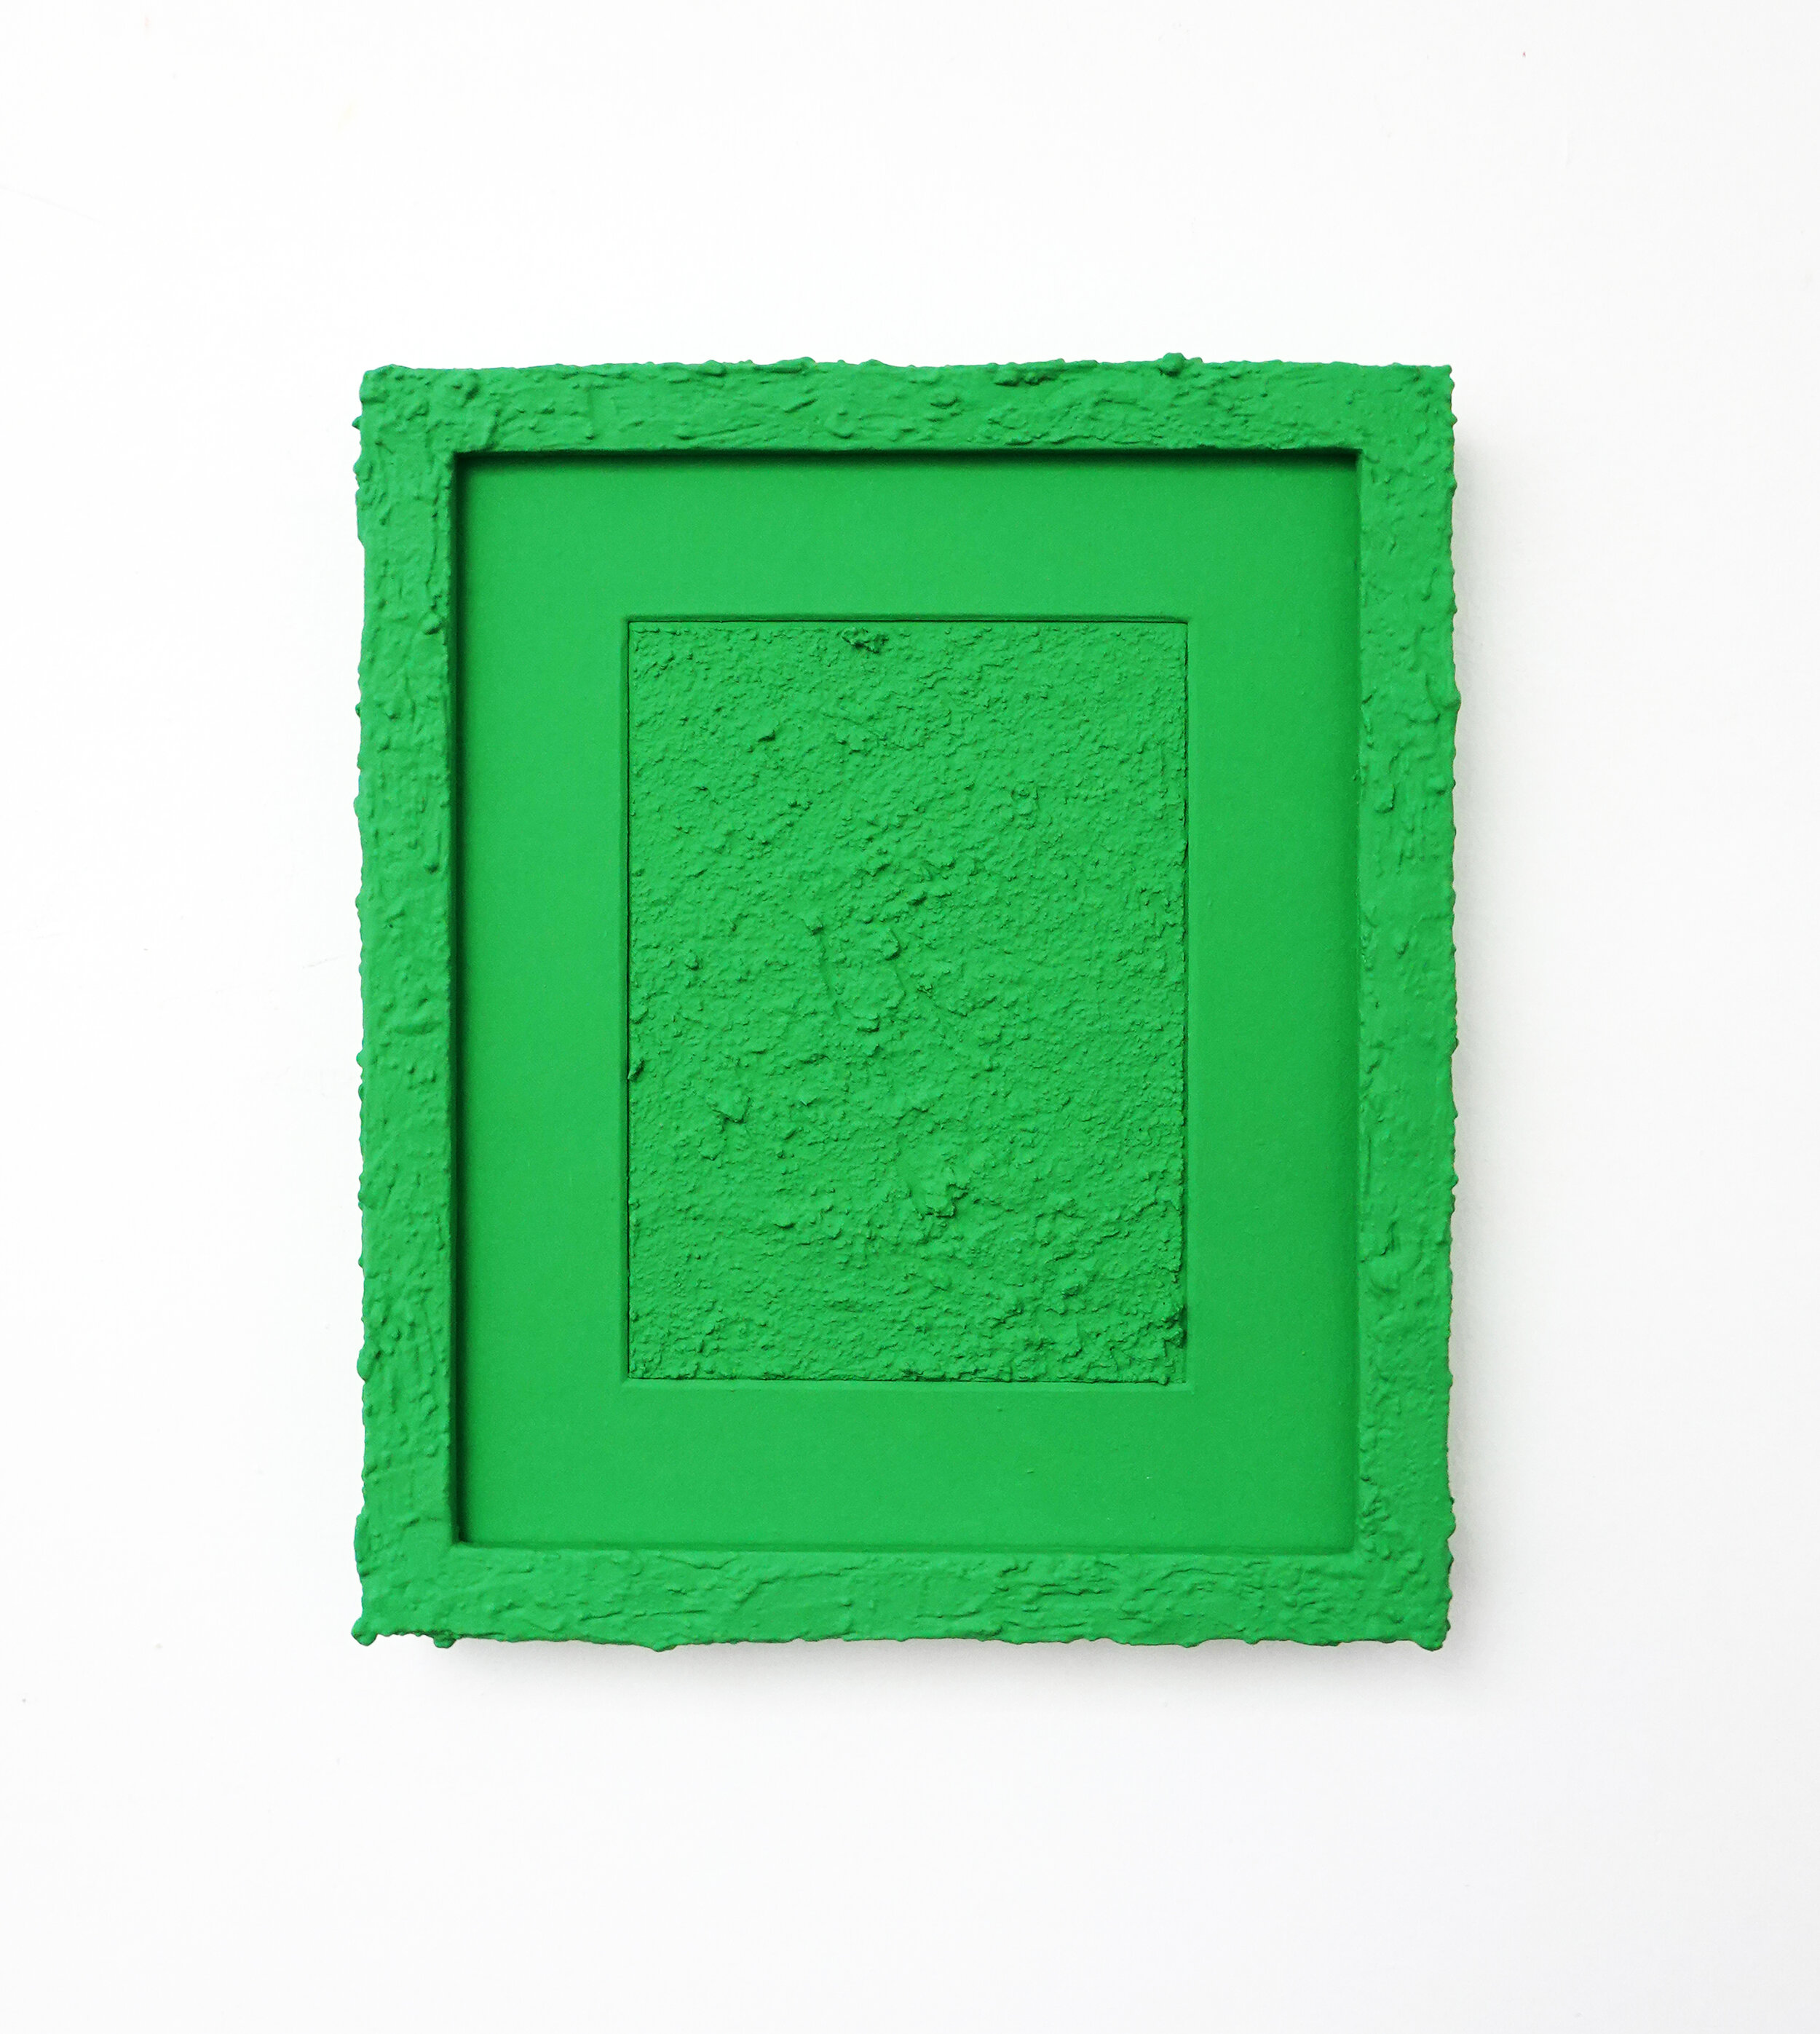  Wall within a wall (Green), 2020, acrylic, flashe, and stucco on paper and wood, 11.5 x 9.5” 